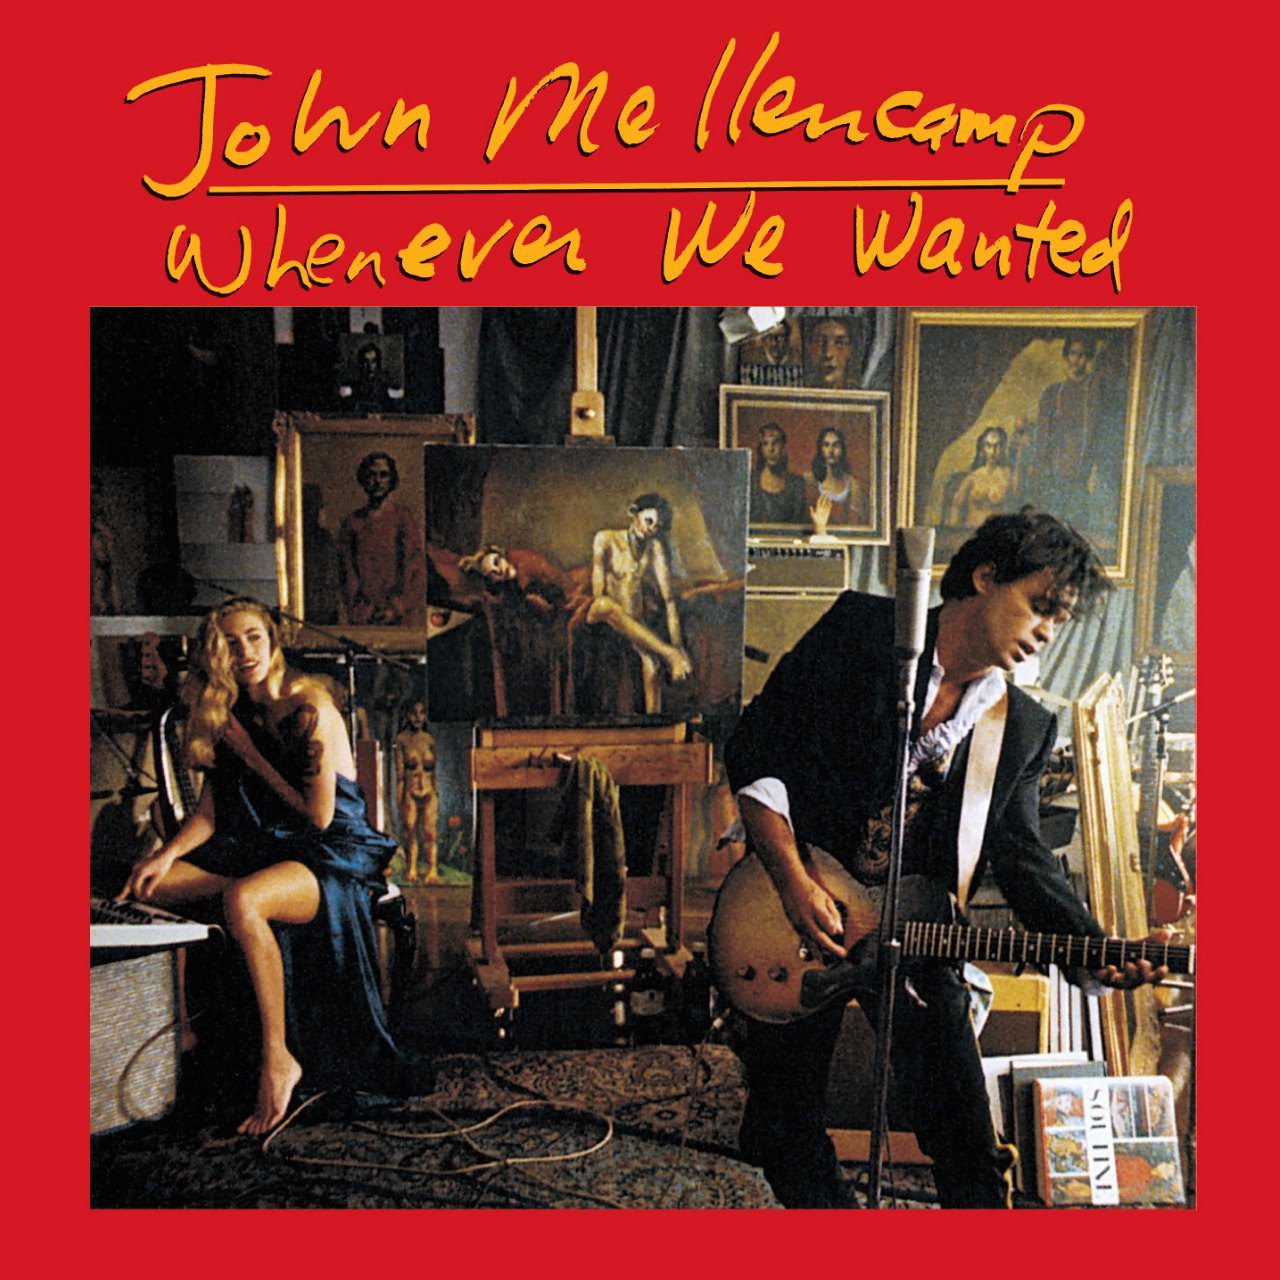 John Mellencamp – Whenever We Wanted cover album